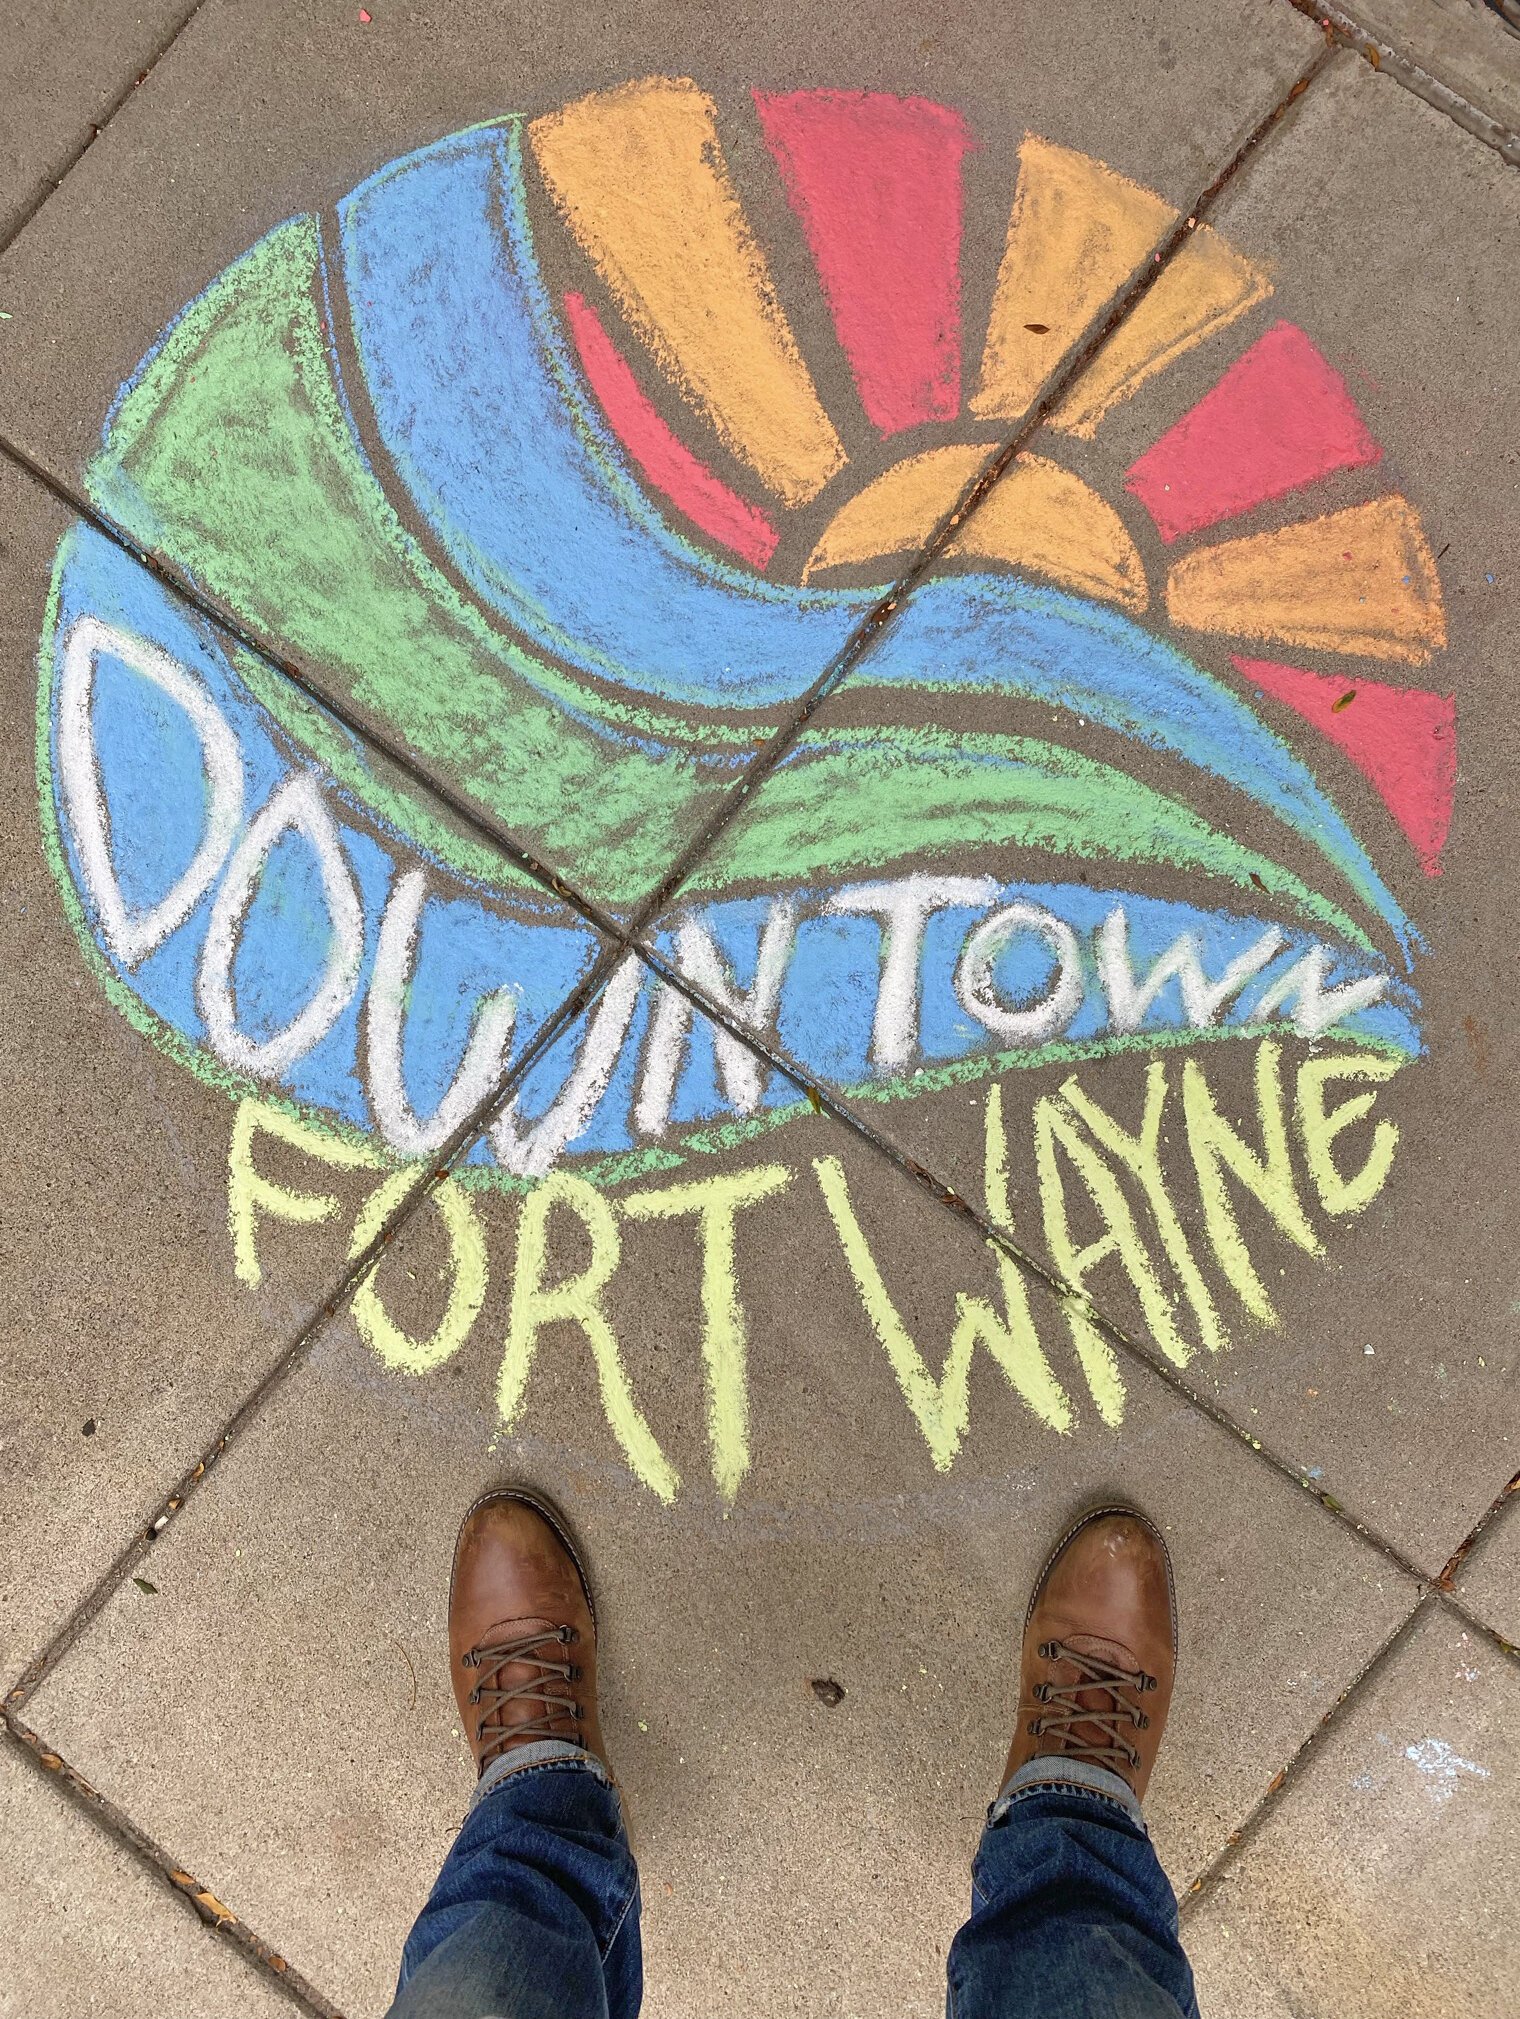 Downtown Fort Wayne is home to many free events, like the annual Downtown Sidewalk Sale August 13-14, 2022.